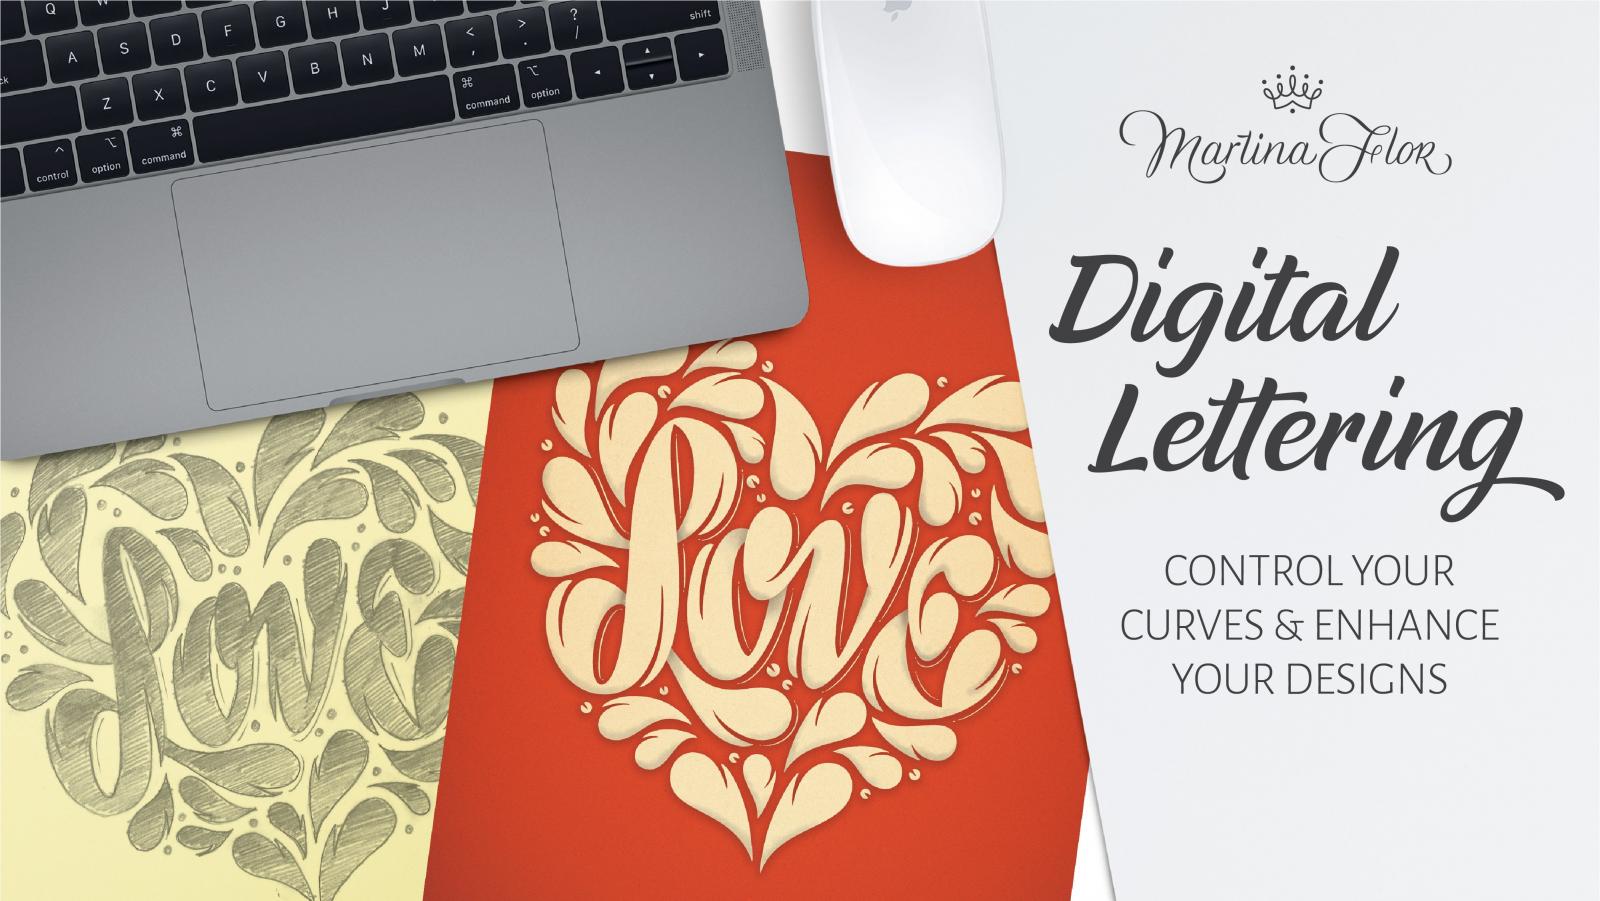 More information about "New online class with Martina Flor: Digital Lettering"